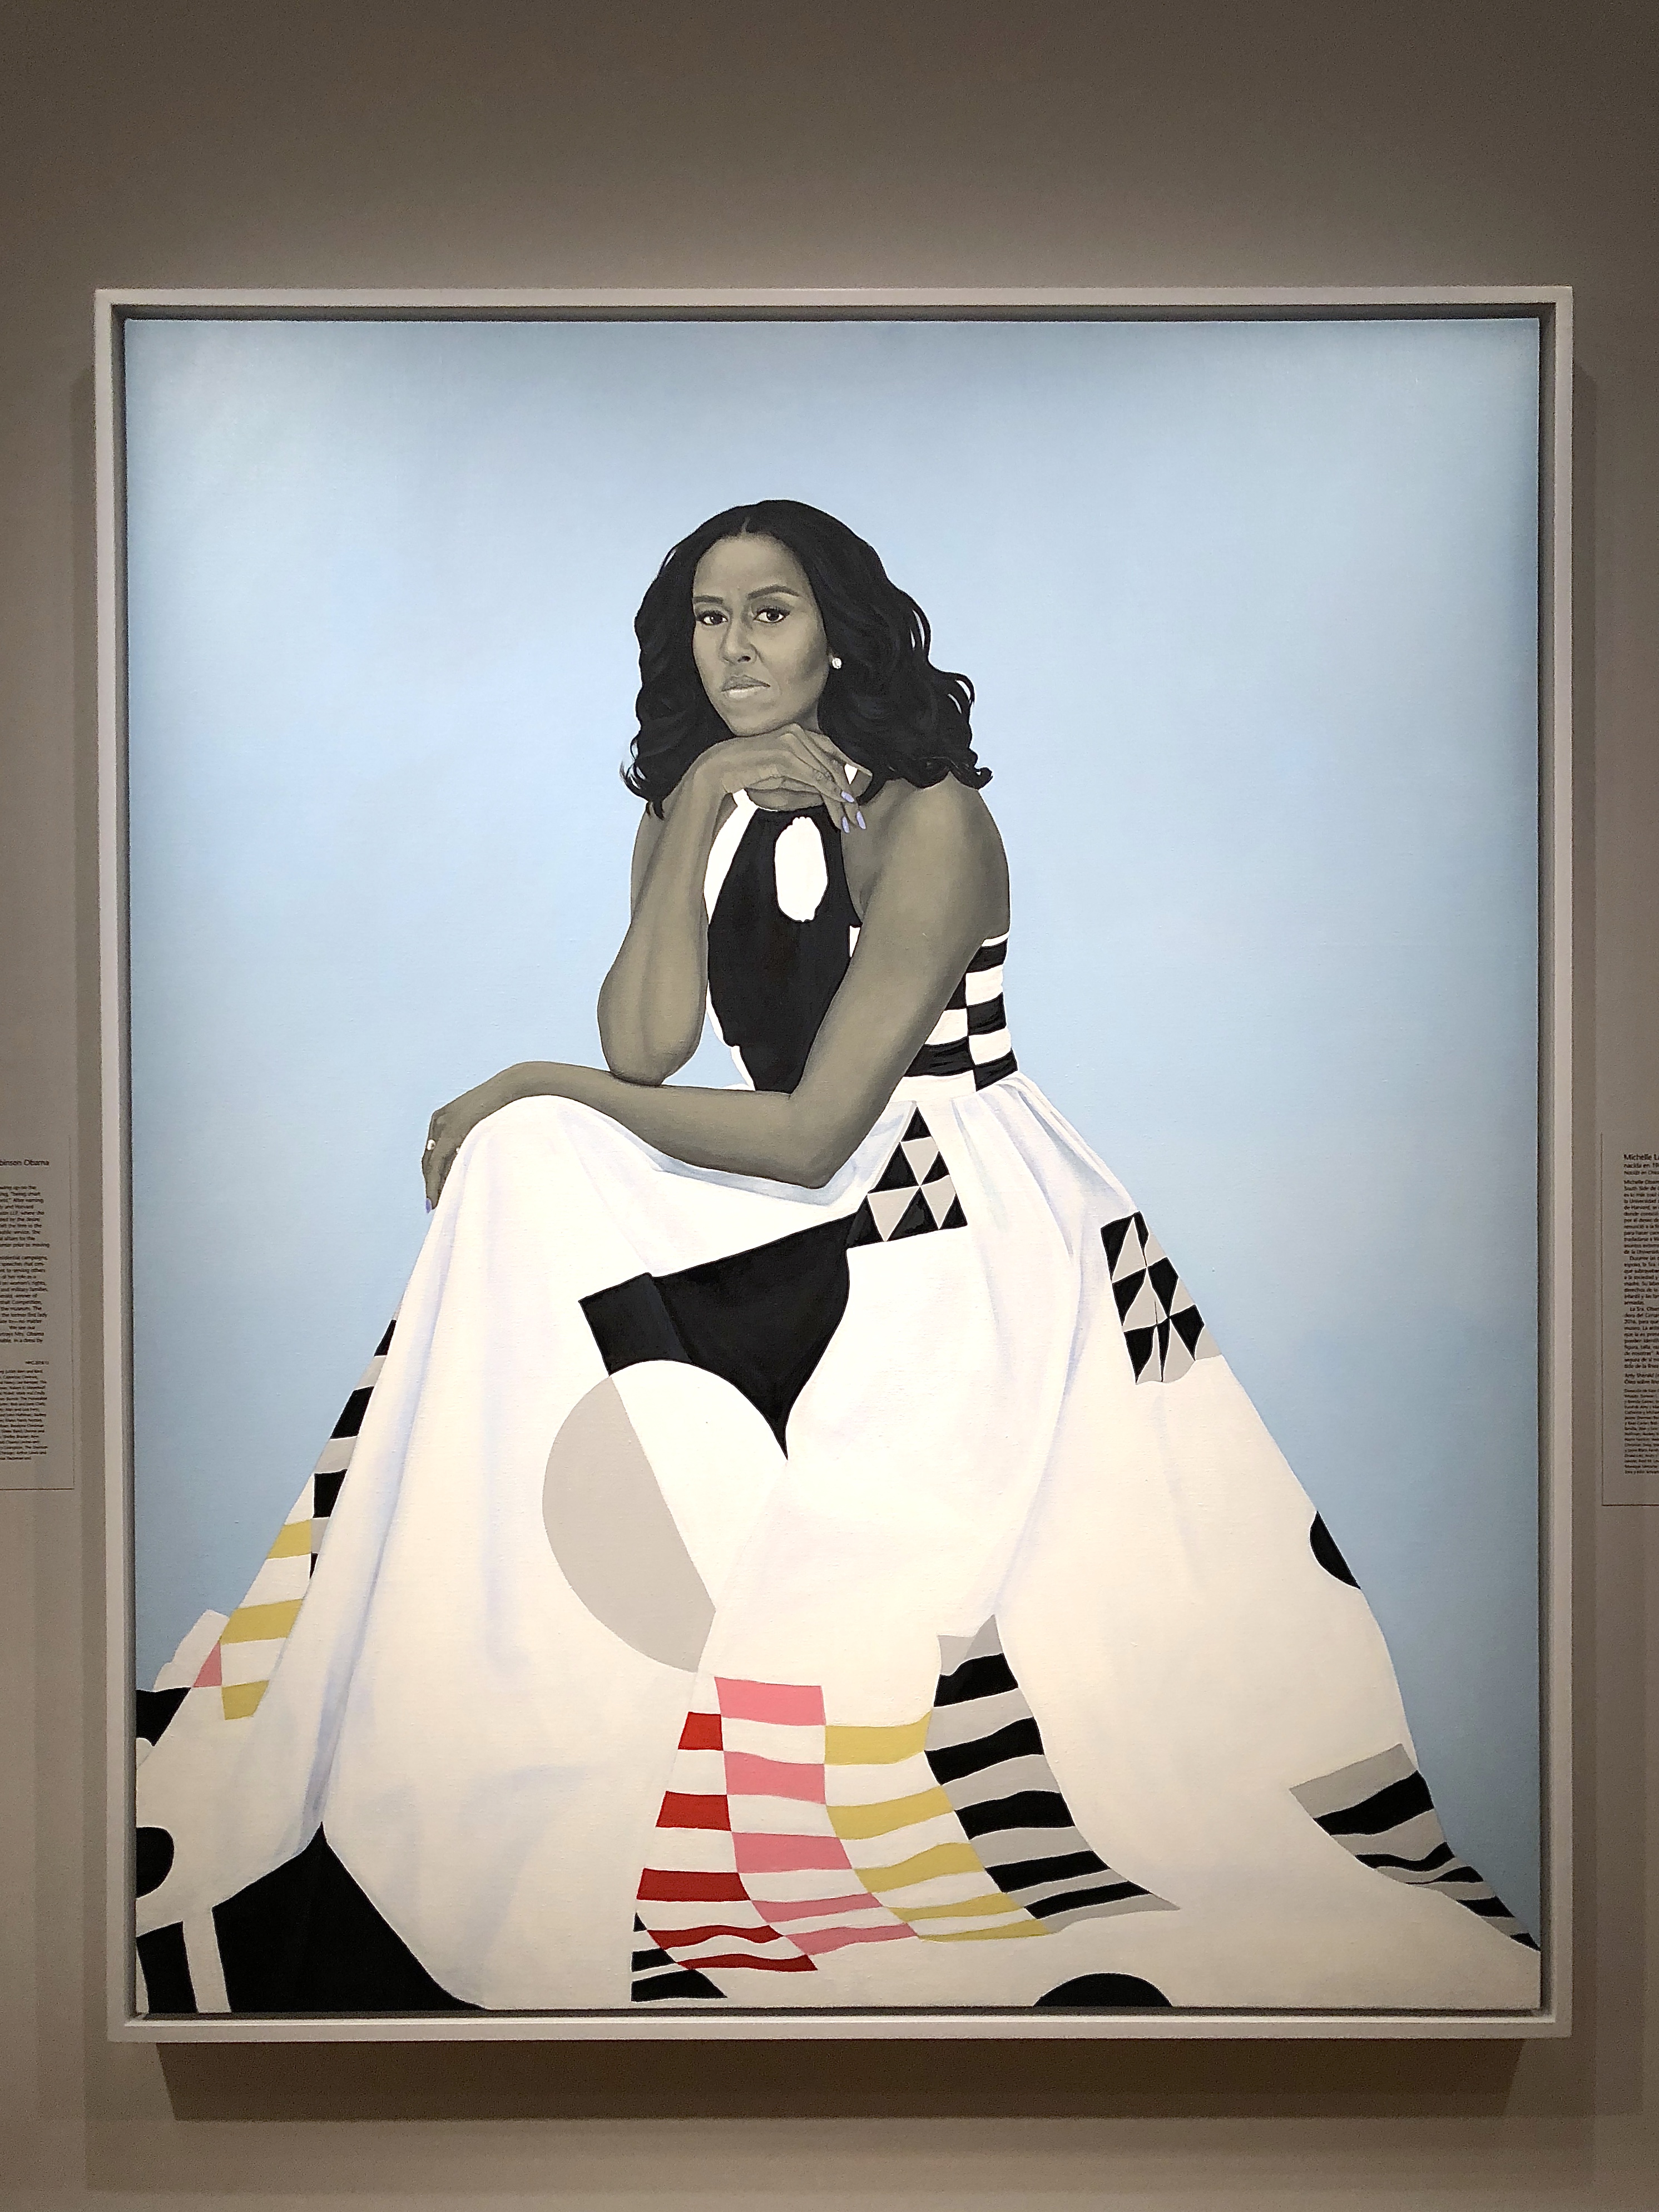 A woman sitting in a white dress with some shapes of color on the dress